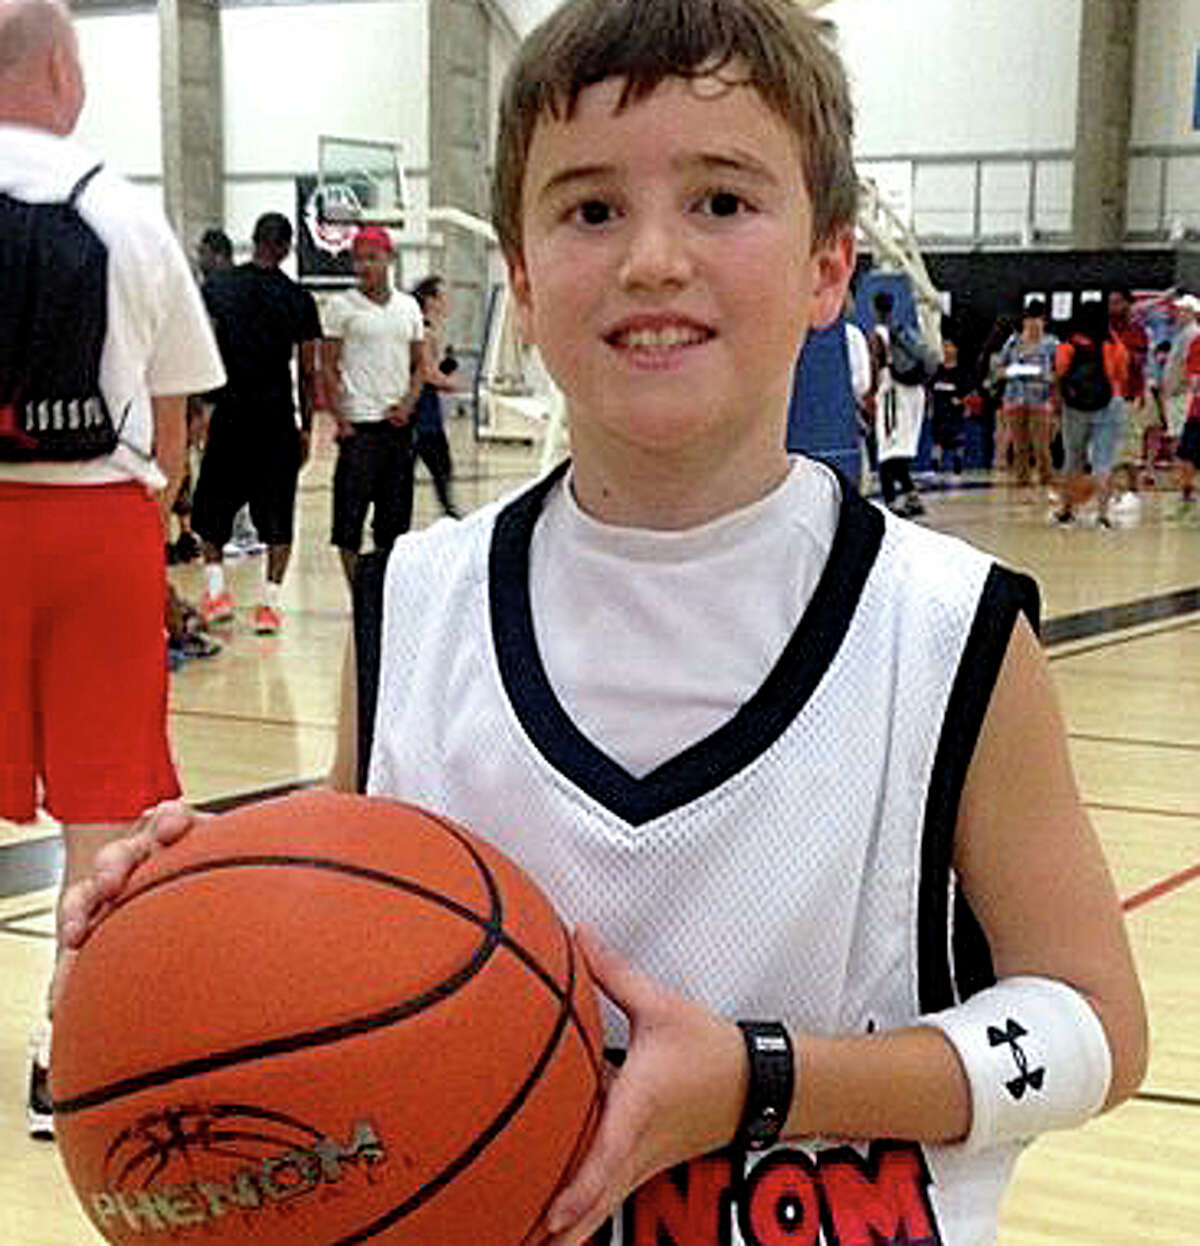 The Adam Greenlee Foundation is helping to organize a campaign to make automated external defibrillators available at all of the town's school athletics facilitie, as well as portable AEDs for Westport students on the road. In 2014, Adam Greenlee Jr., pictured, then a sixth-grader at Bedford Middle School, suffered a seizure and cardiac arrest, but was revived by staff who treated him with an AED and cardio-pulmonary resuscitation before he was taken to a hospital.